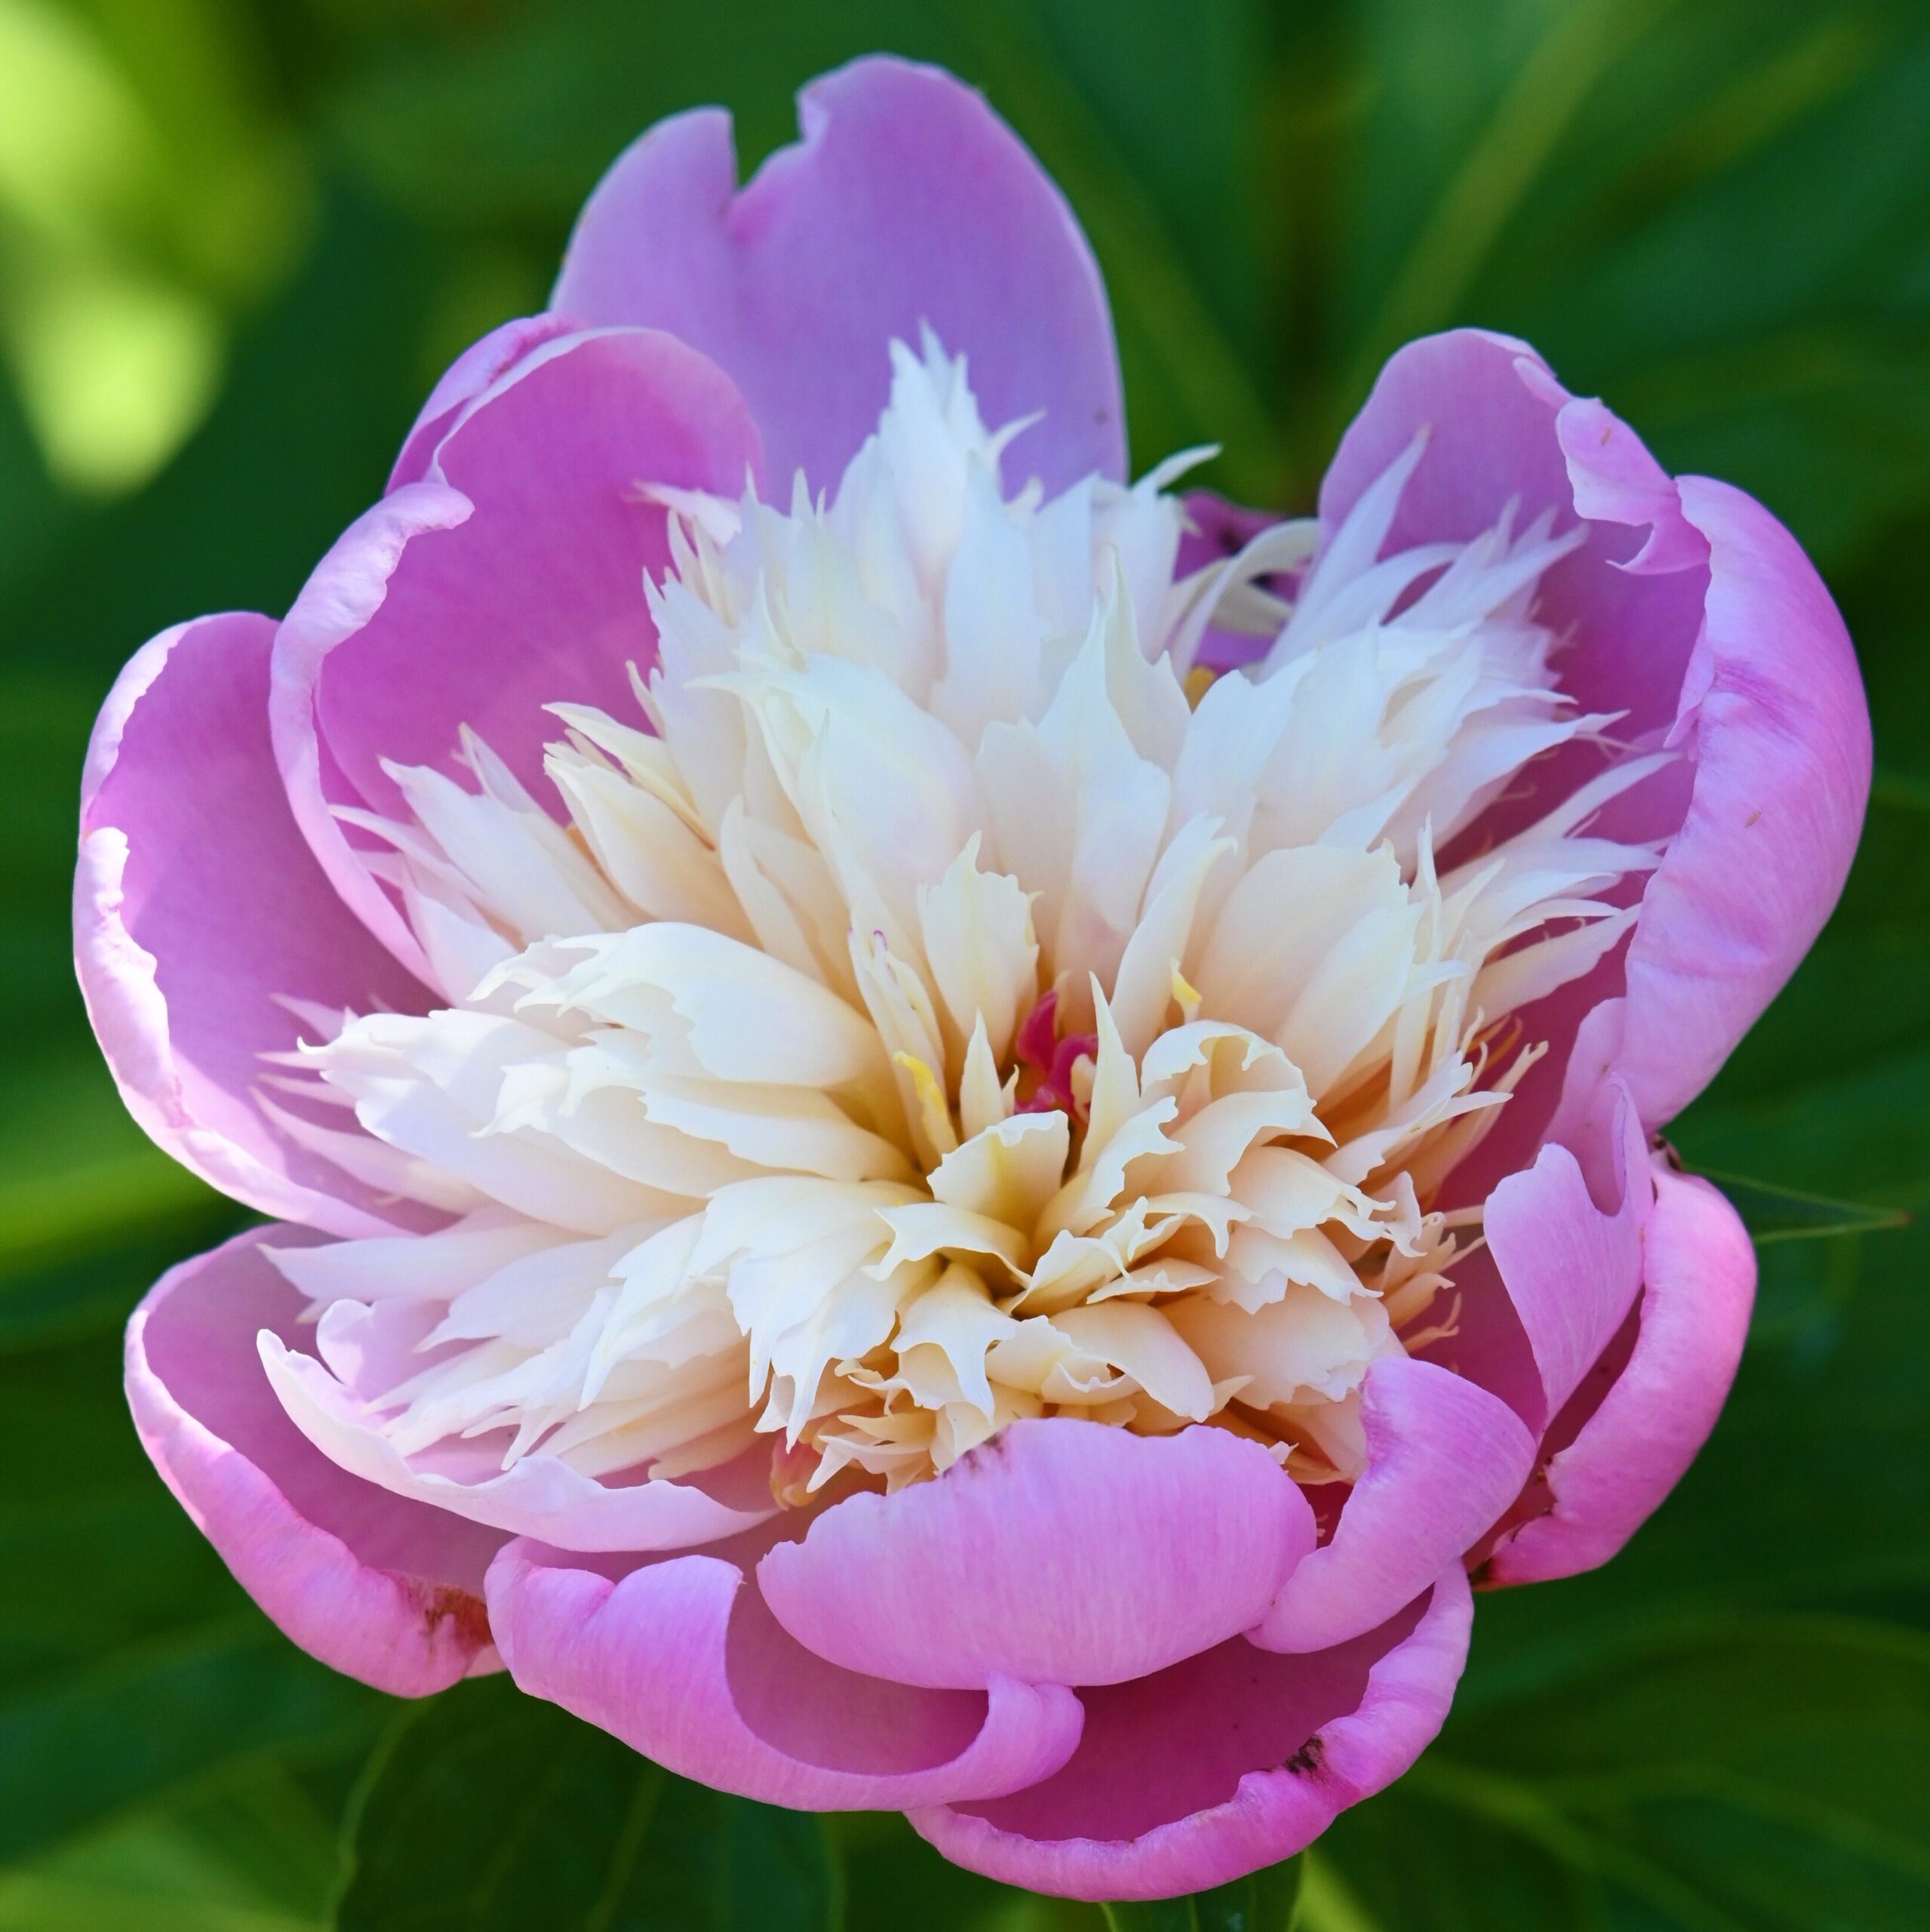 Close-up photo of a pink peony bloom.